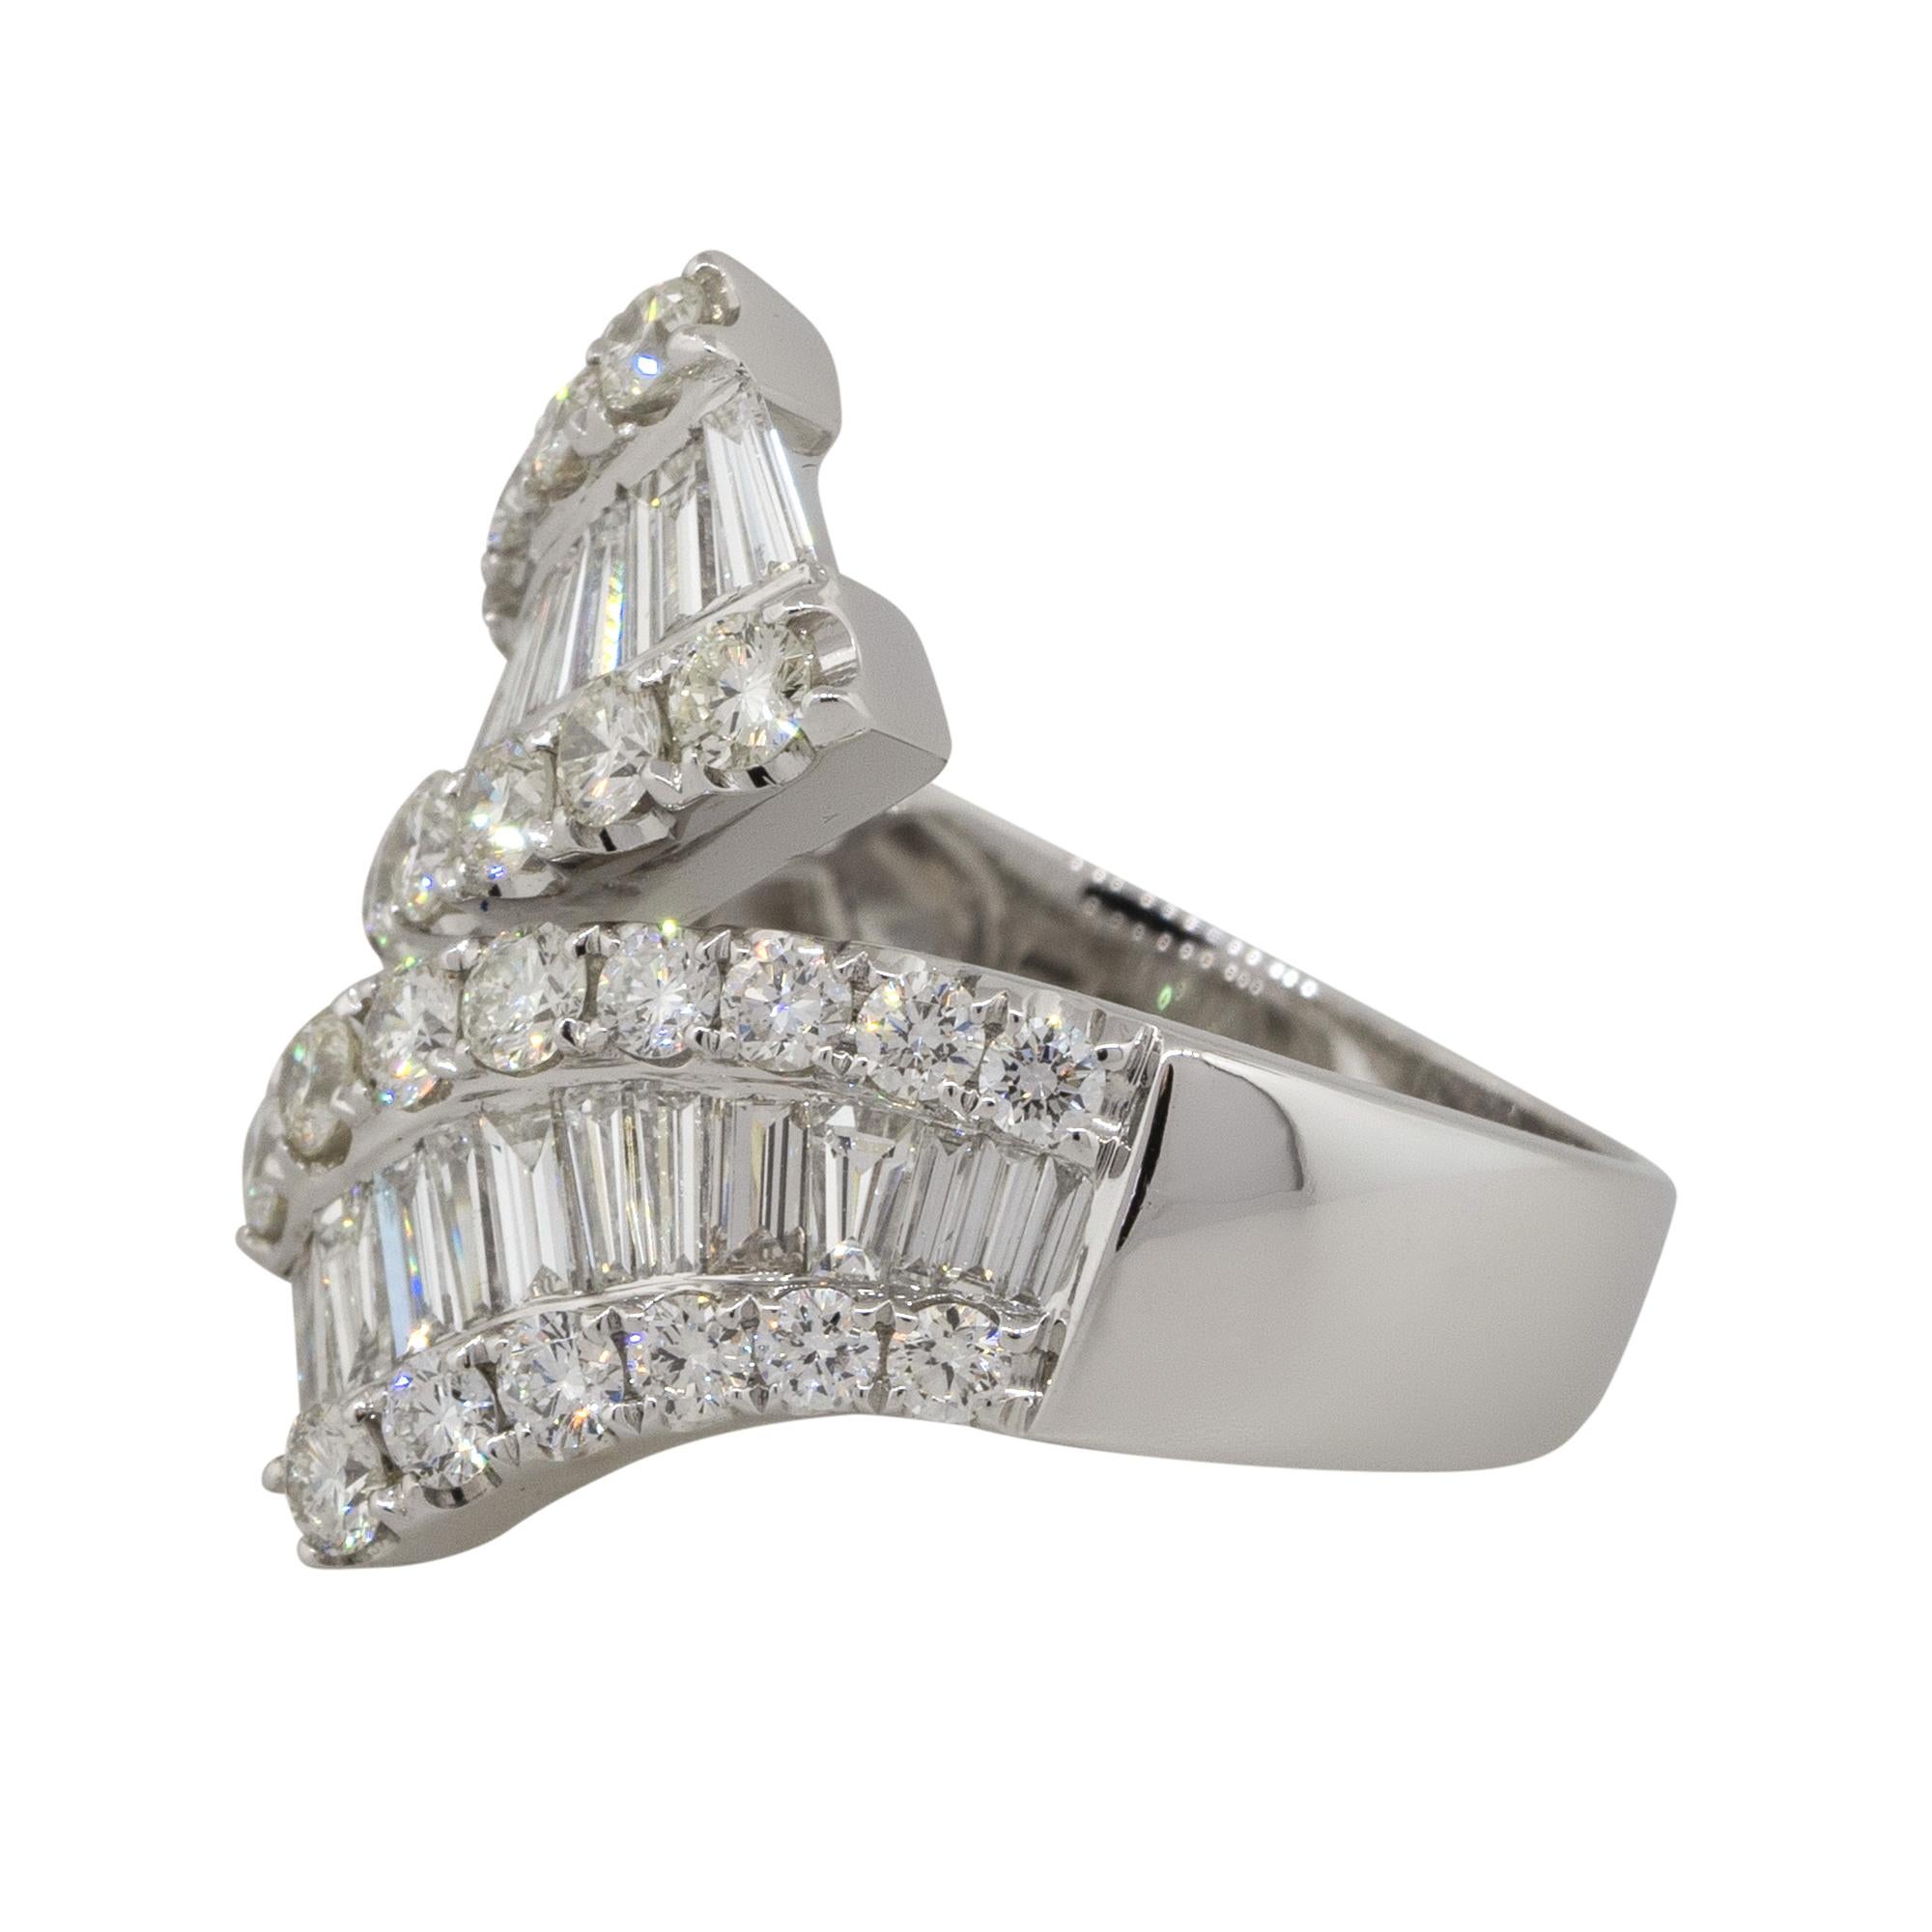 Material: 18k white gold
Diamond Details: Approx. 1.37ctw of round cut Diamonds. Diamonds are G/H in color and VS in clarity
                             Approx. 1.19ctw of baguette cut Diamonds. Diamonds are G/H in color and VS in clarity
Size: